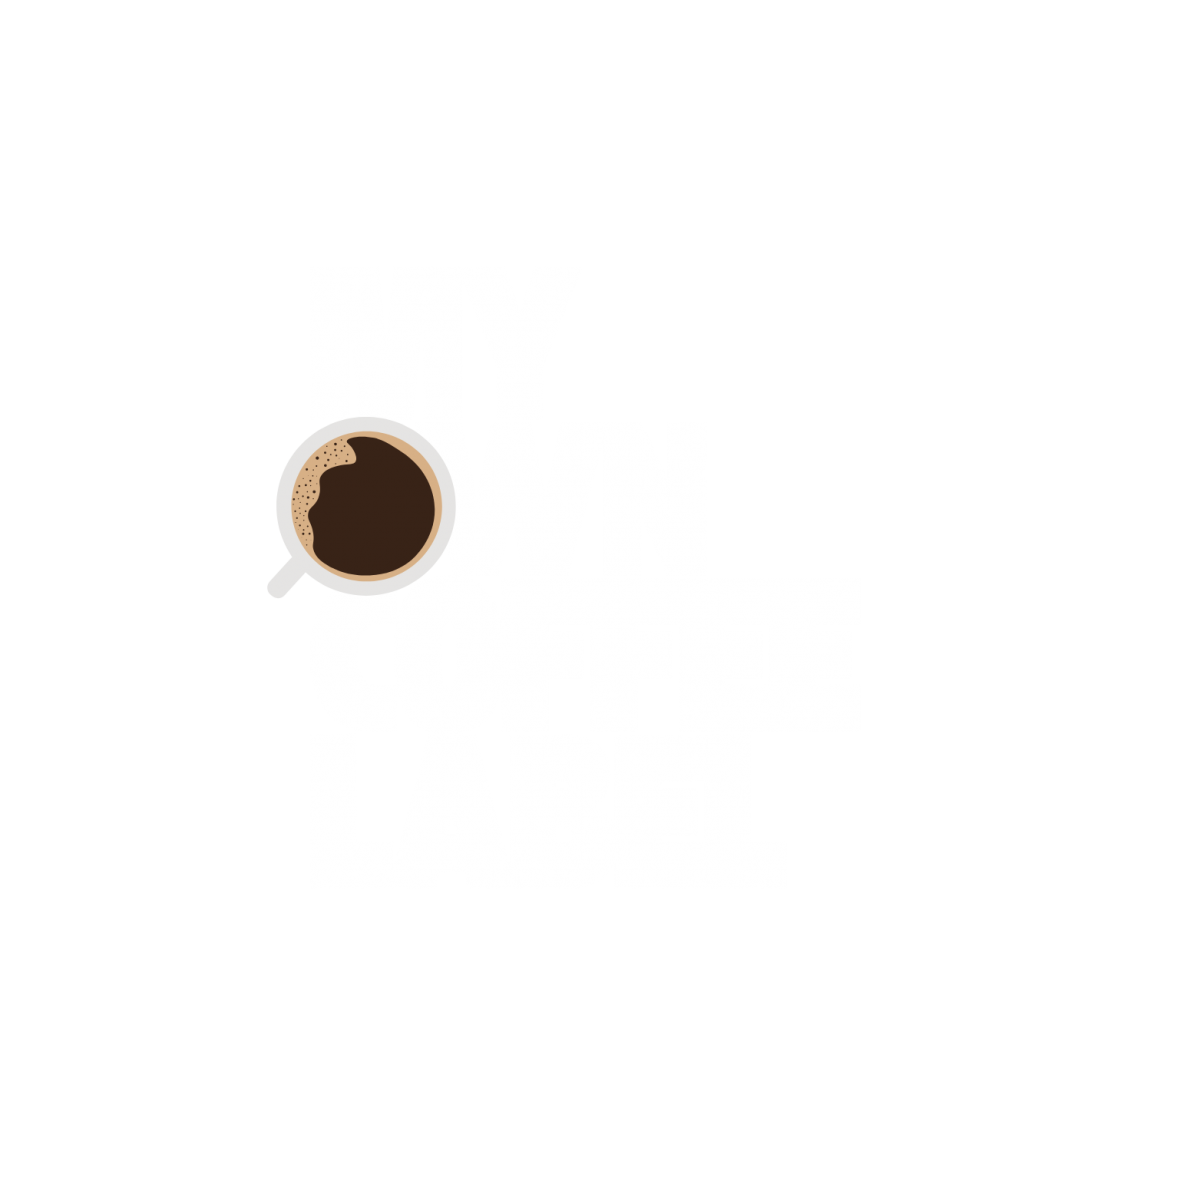 My Own Coffee Label